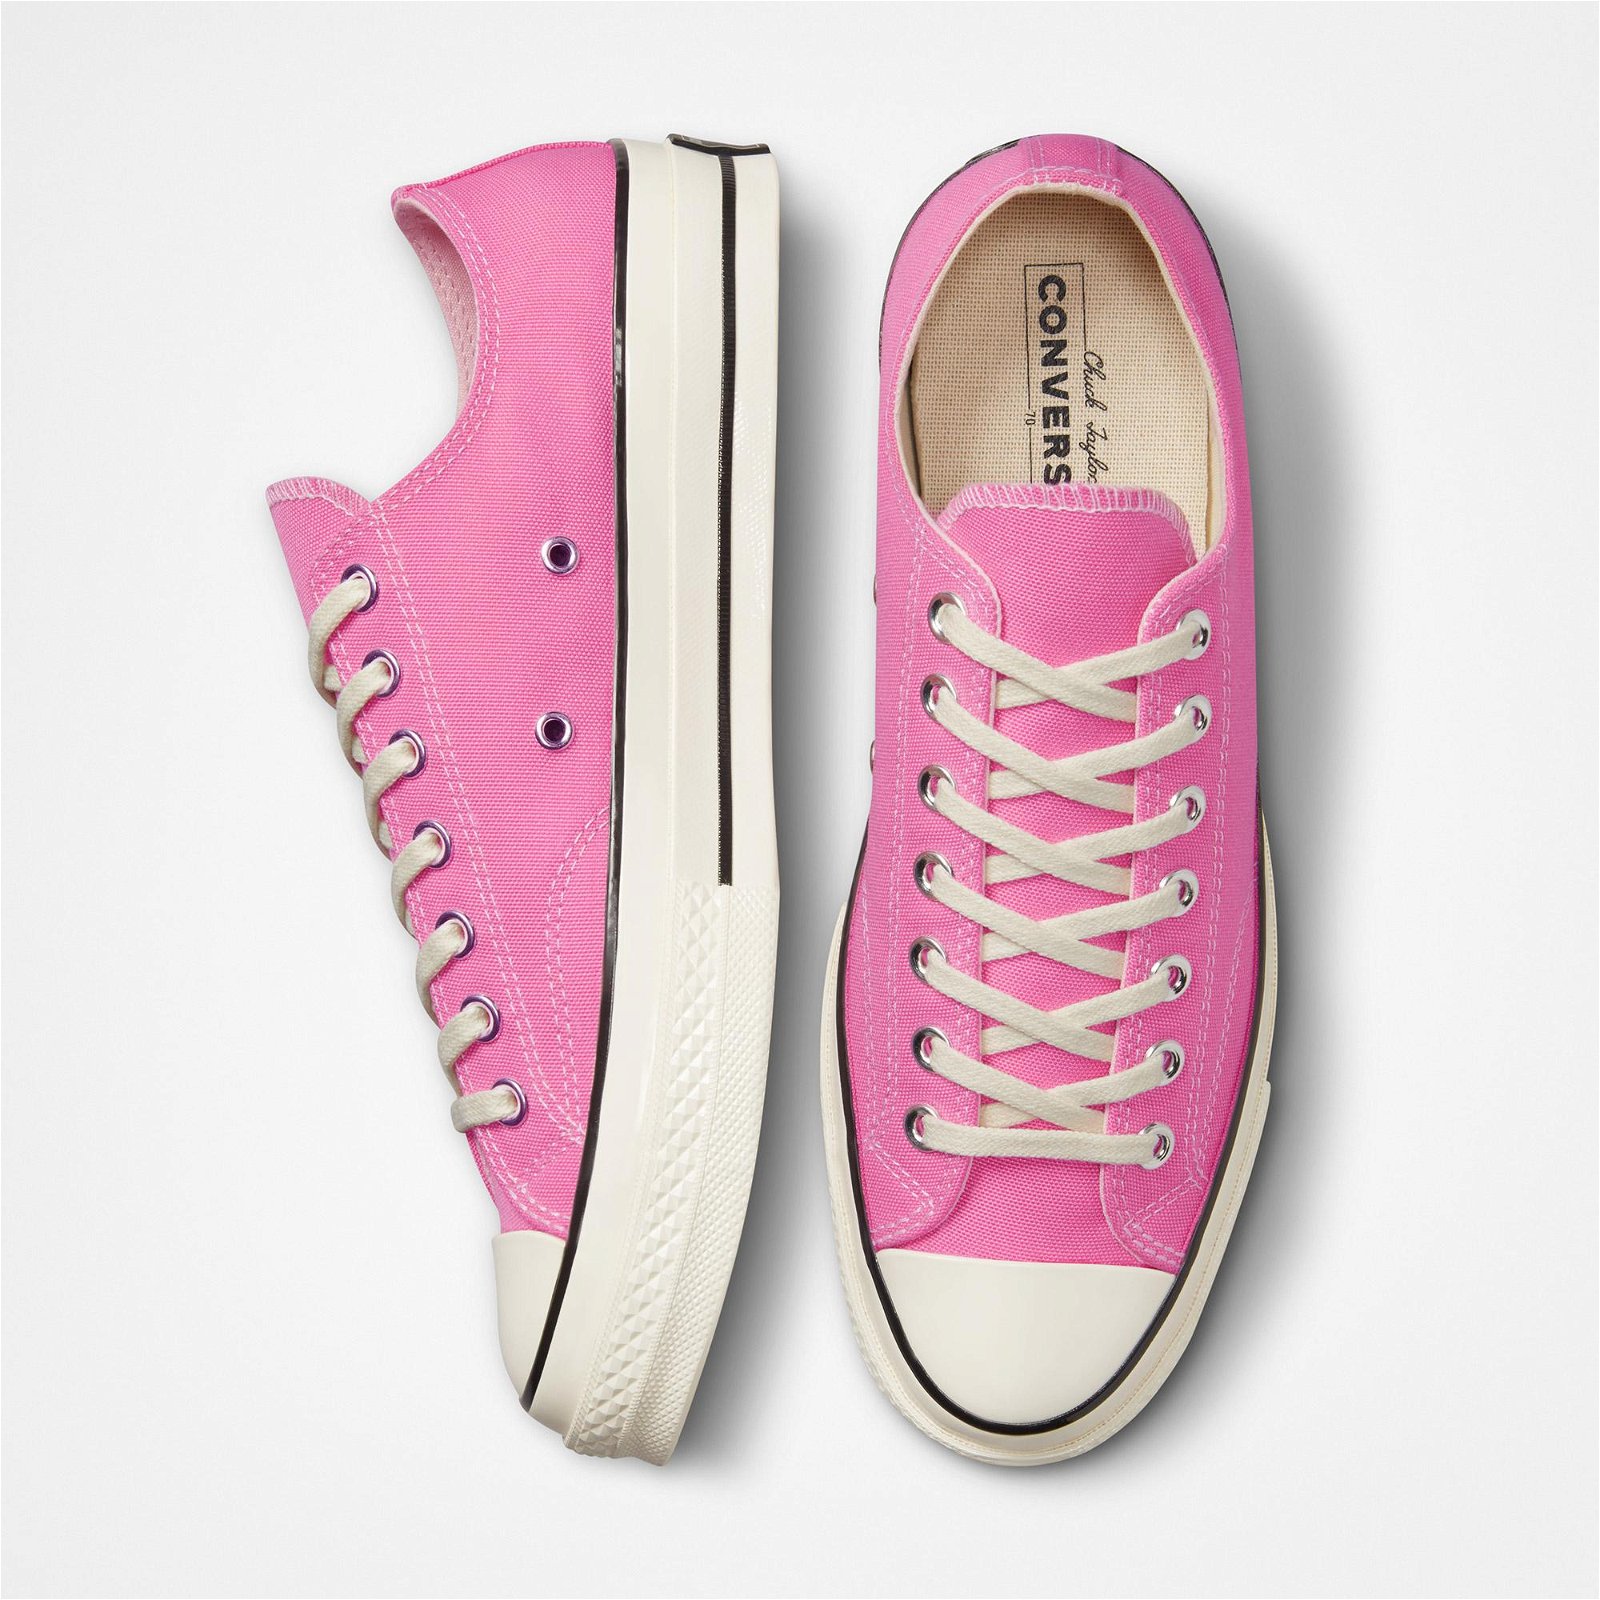 Converse Chuck 70 Recycled Rpet Canvas Low Unisex Pembe Sneaker